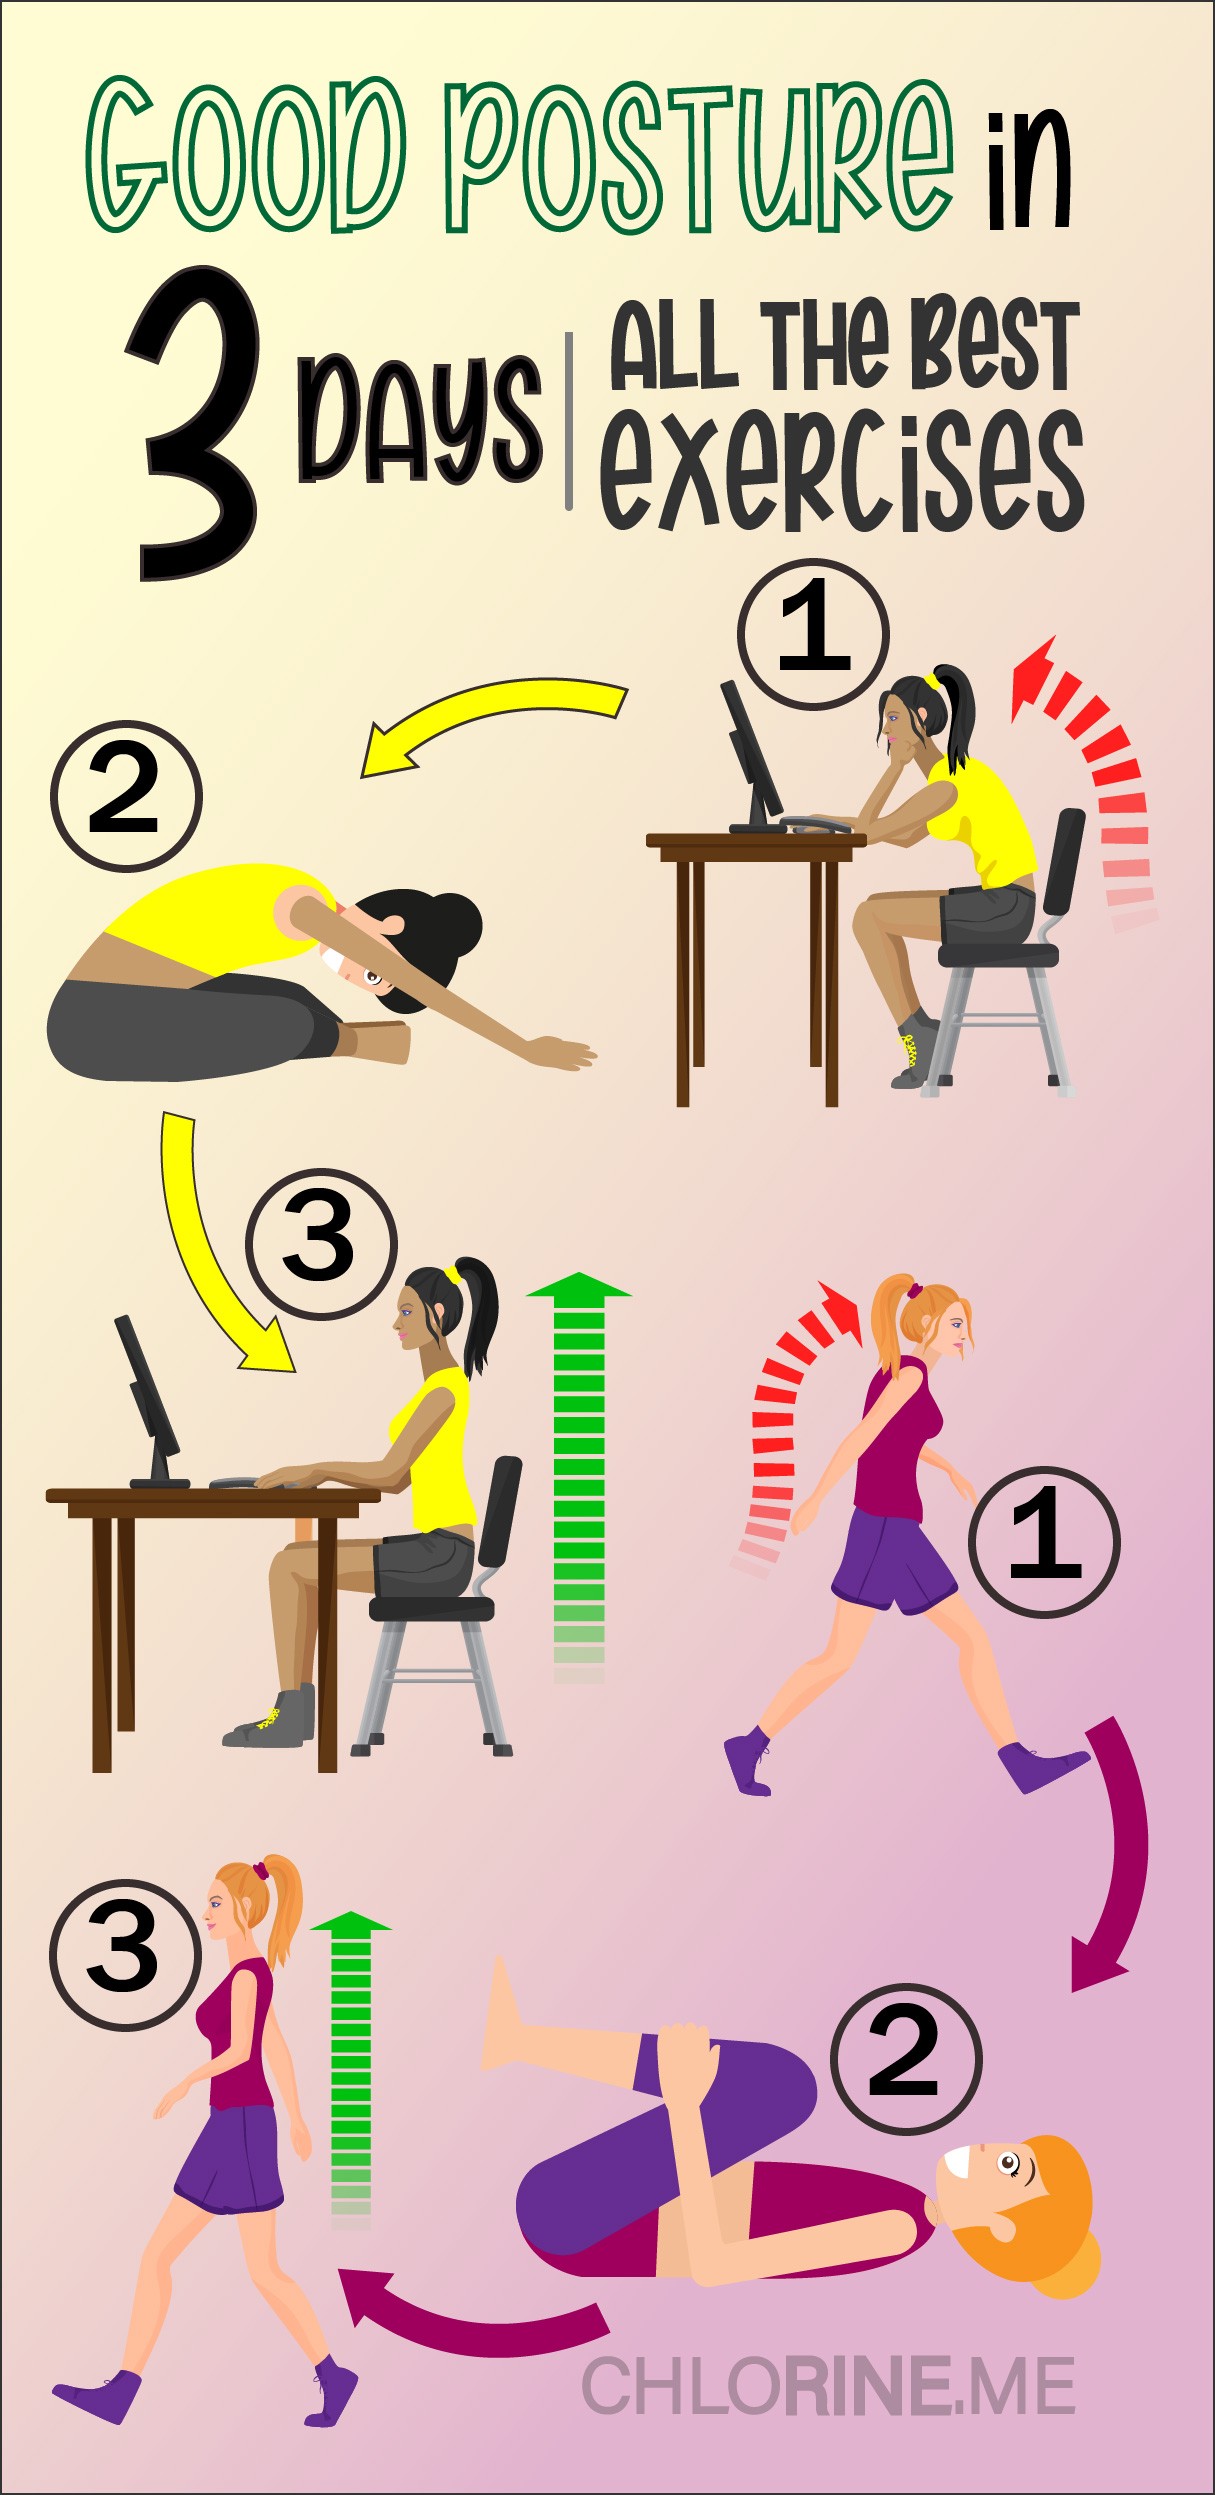 EXERCISES FOR A GOOD POSTURE